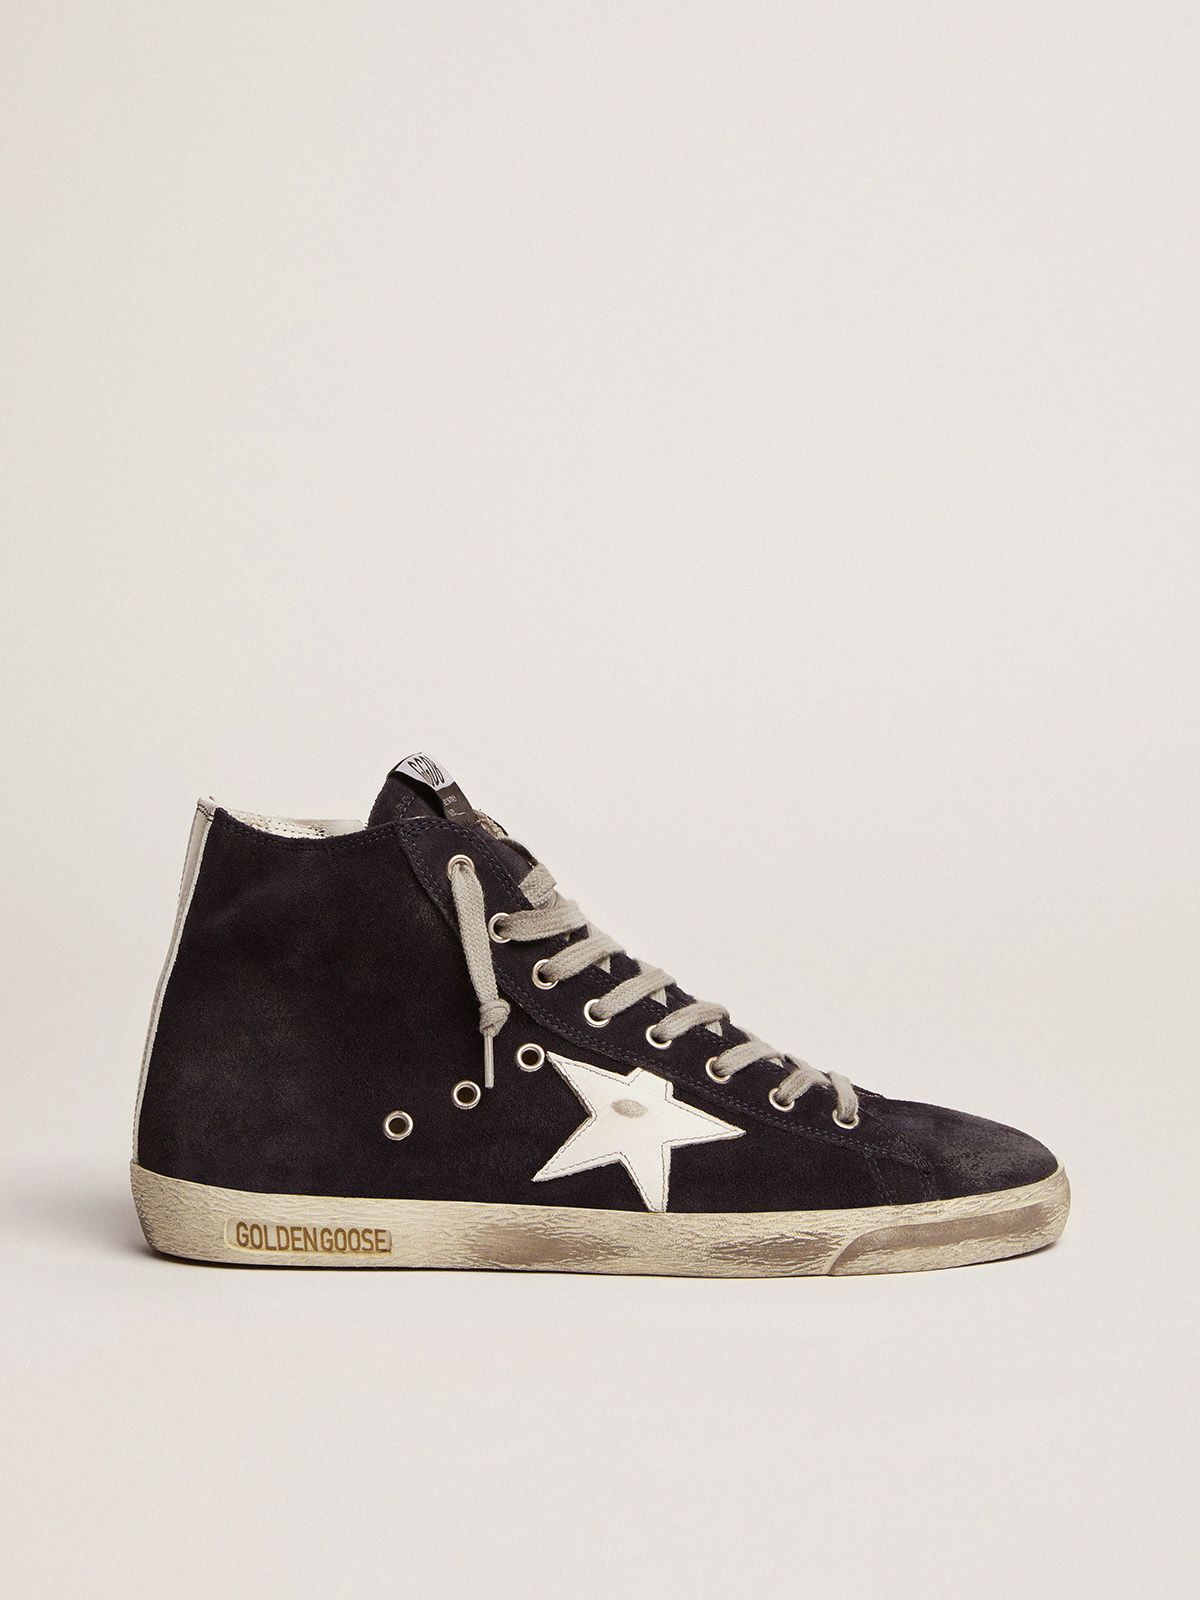 golden goose with in heel star Francy leather tab and sneakers